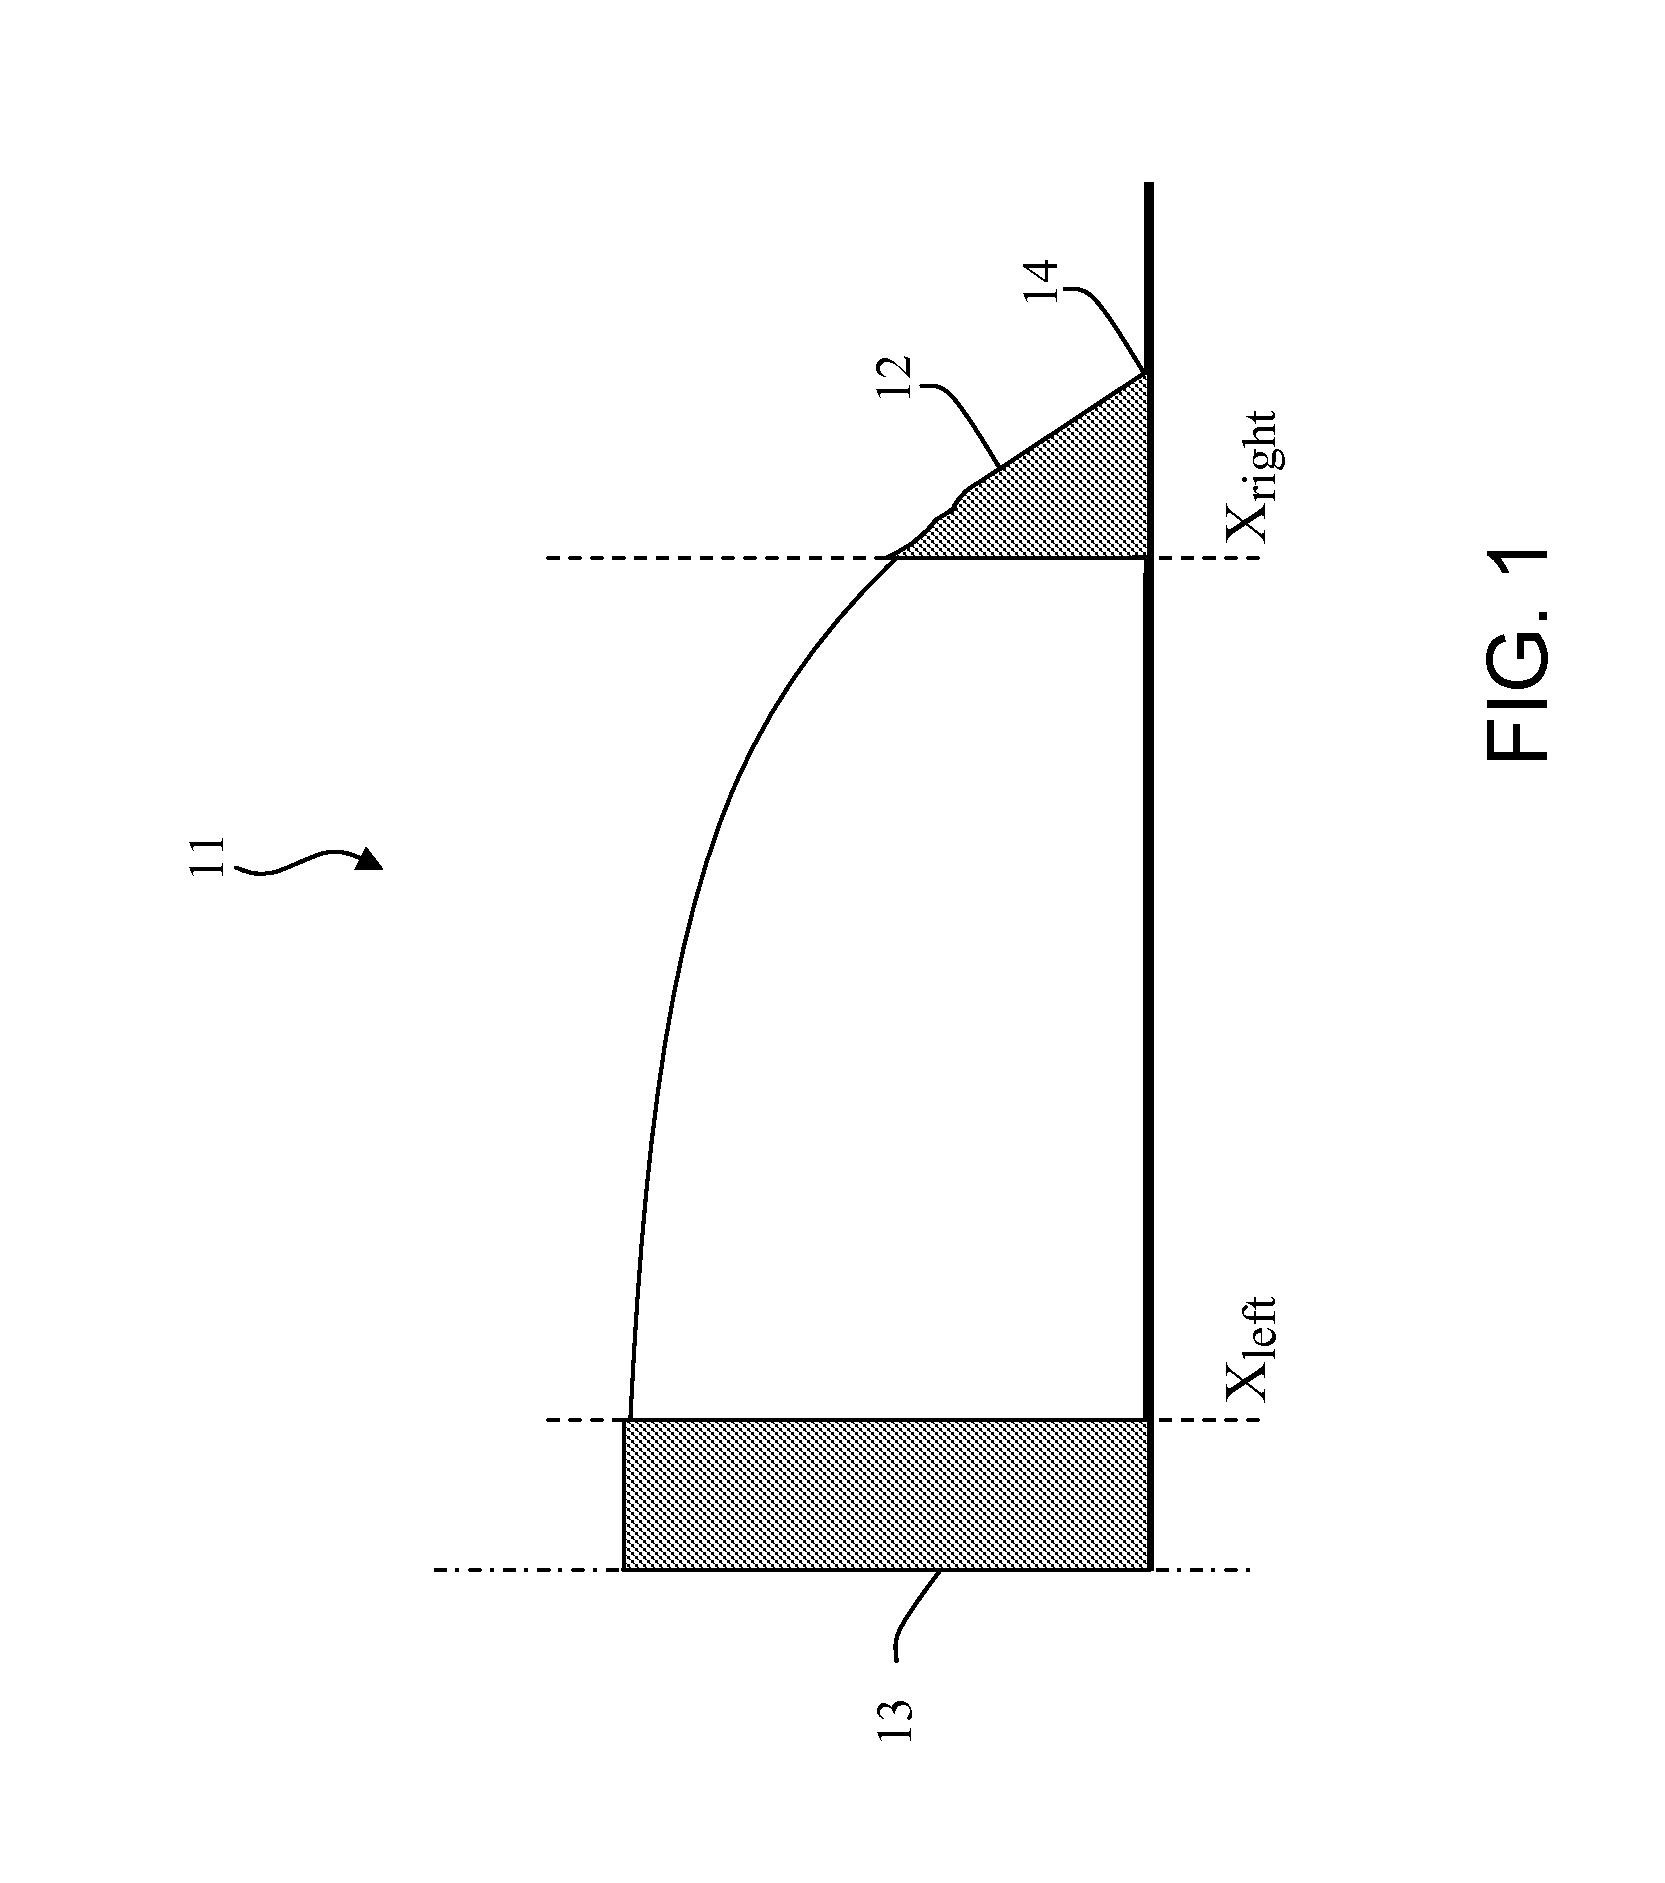 Finite Difference Scheme for Solving Droplet Evaporation Lubrication Equations on a Time-Dependent Varying Domain